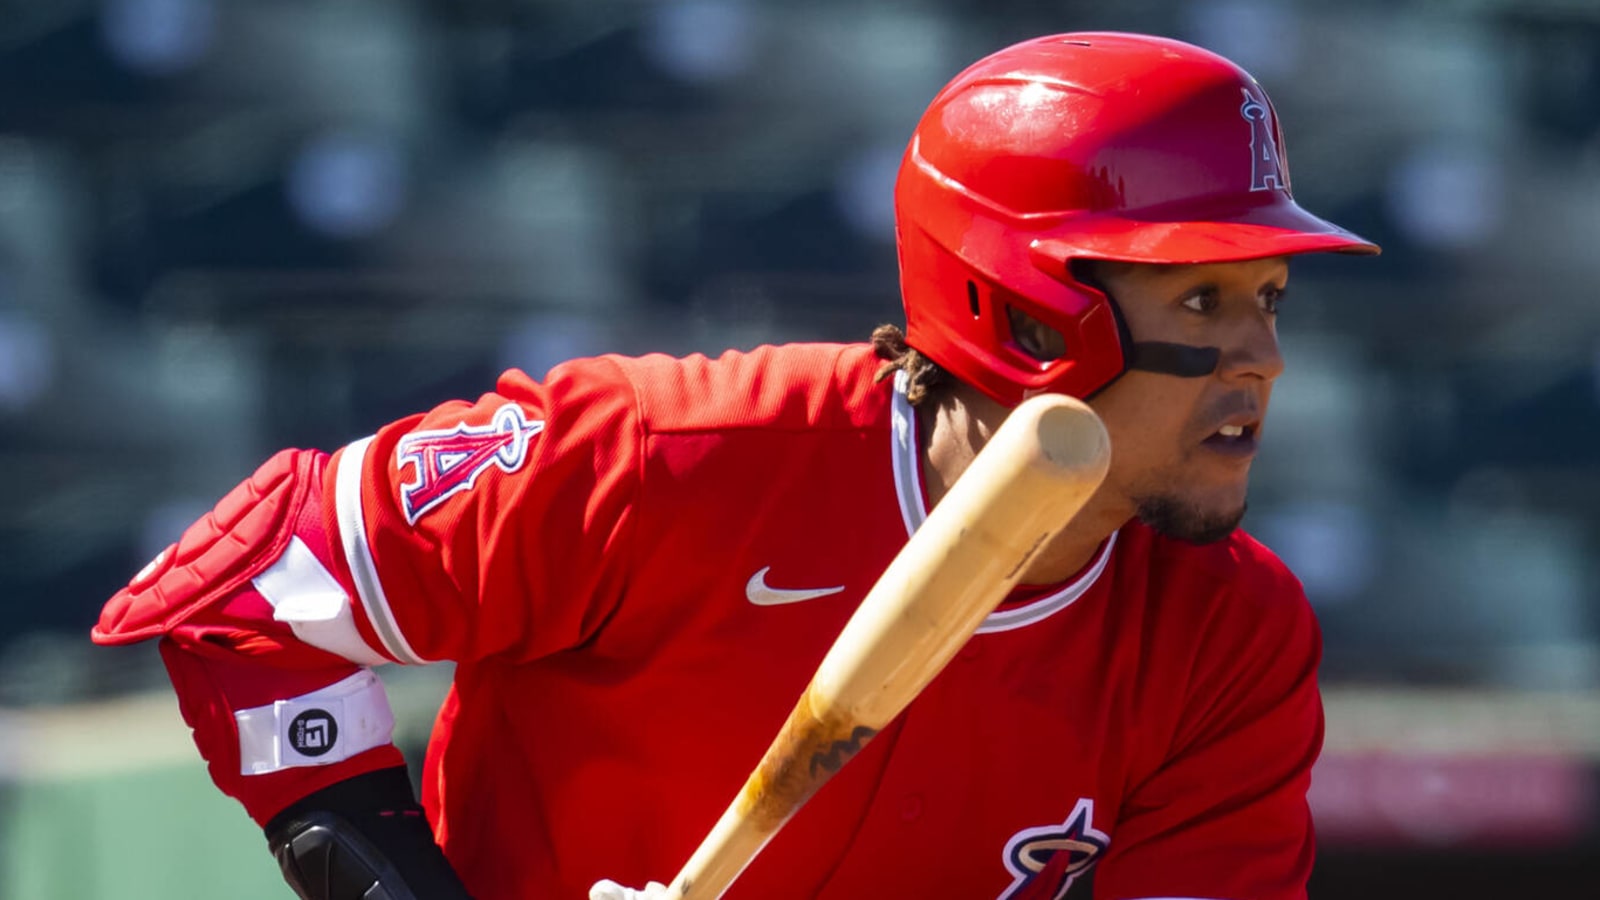 Outfielder Jon Jay retires after 12 years in MLB